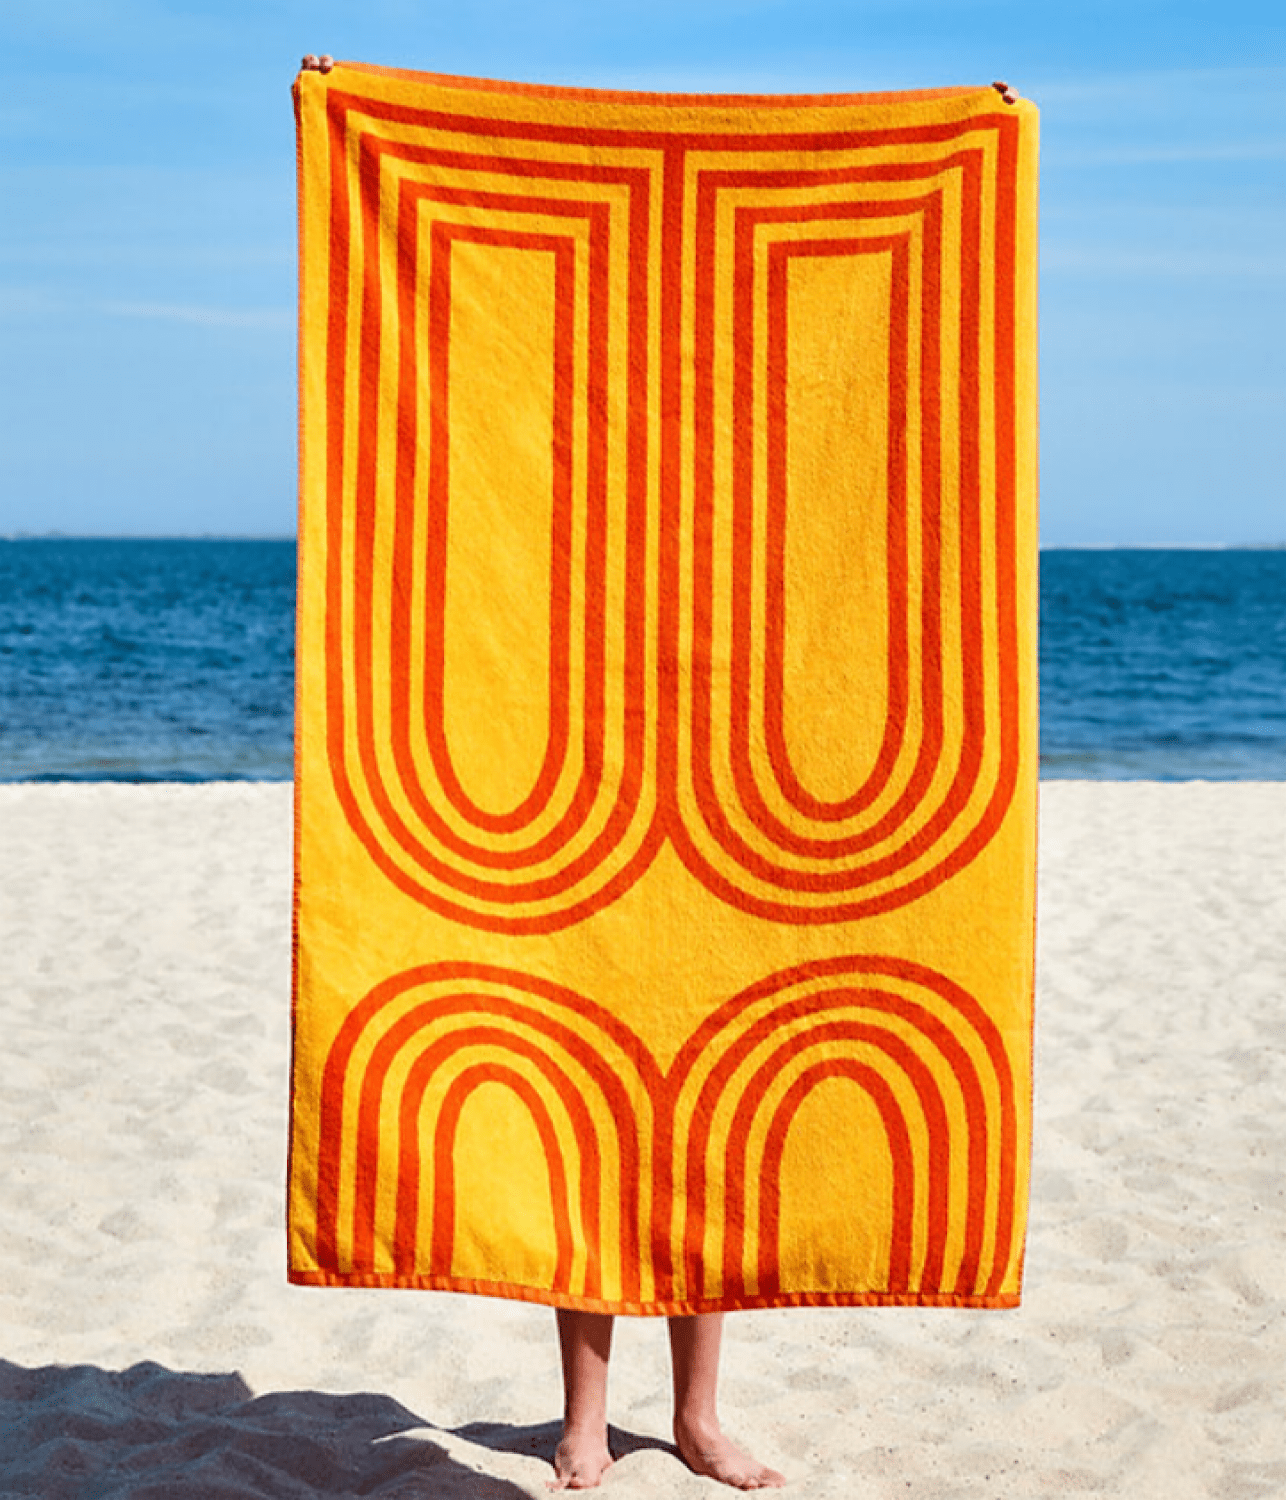 ARC TOWEL - WARM |LATERAL OBJECTS| LATERAL OBJECTS ARC TOWEL - WARM